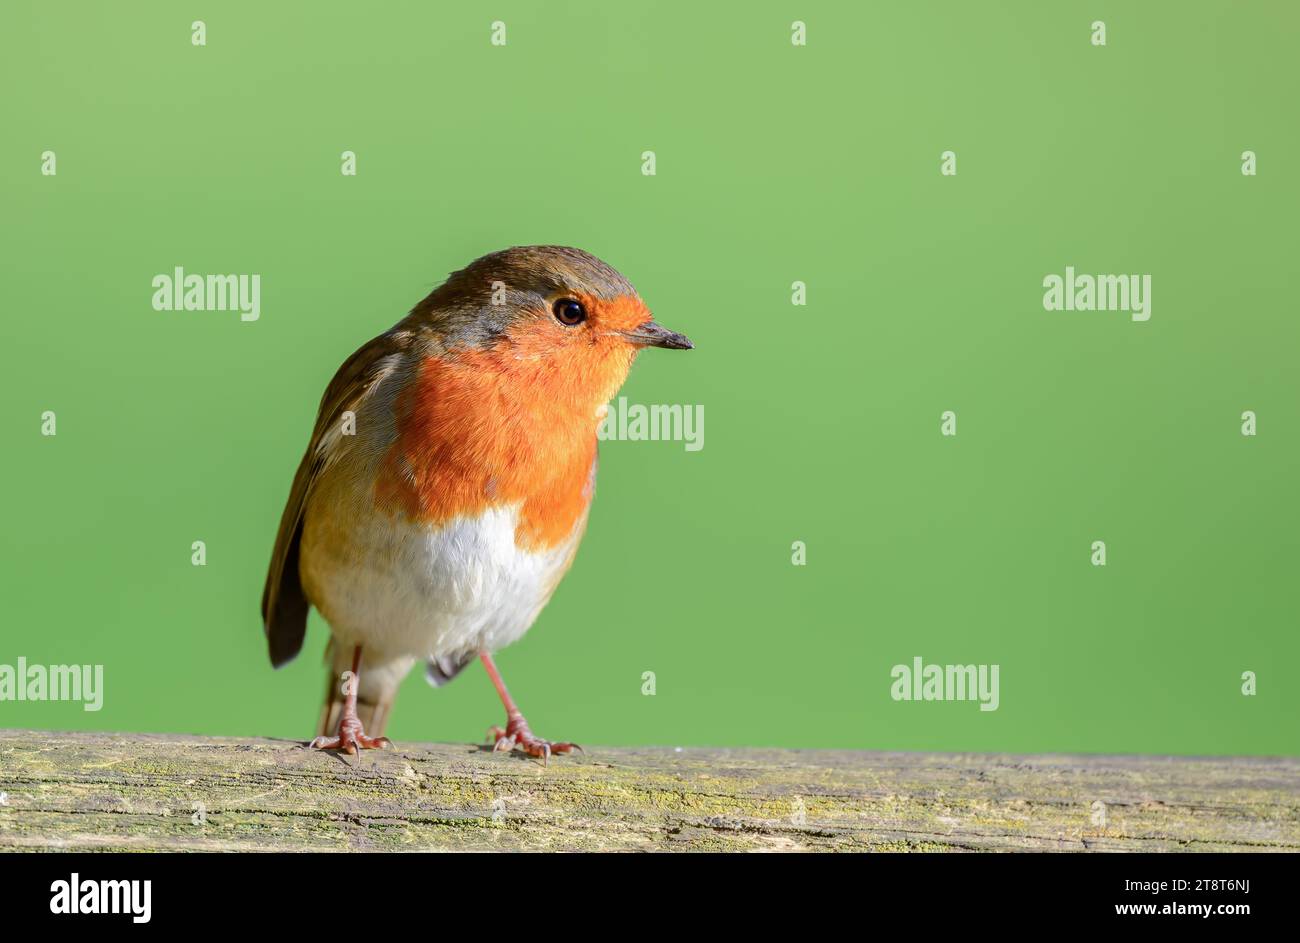 Robin, Erithacus rubecula, perched on a gate. Stock Photo